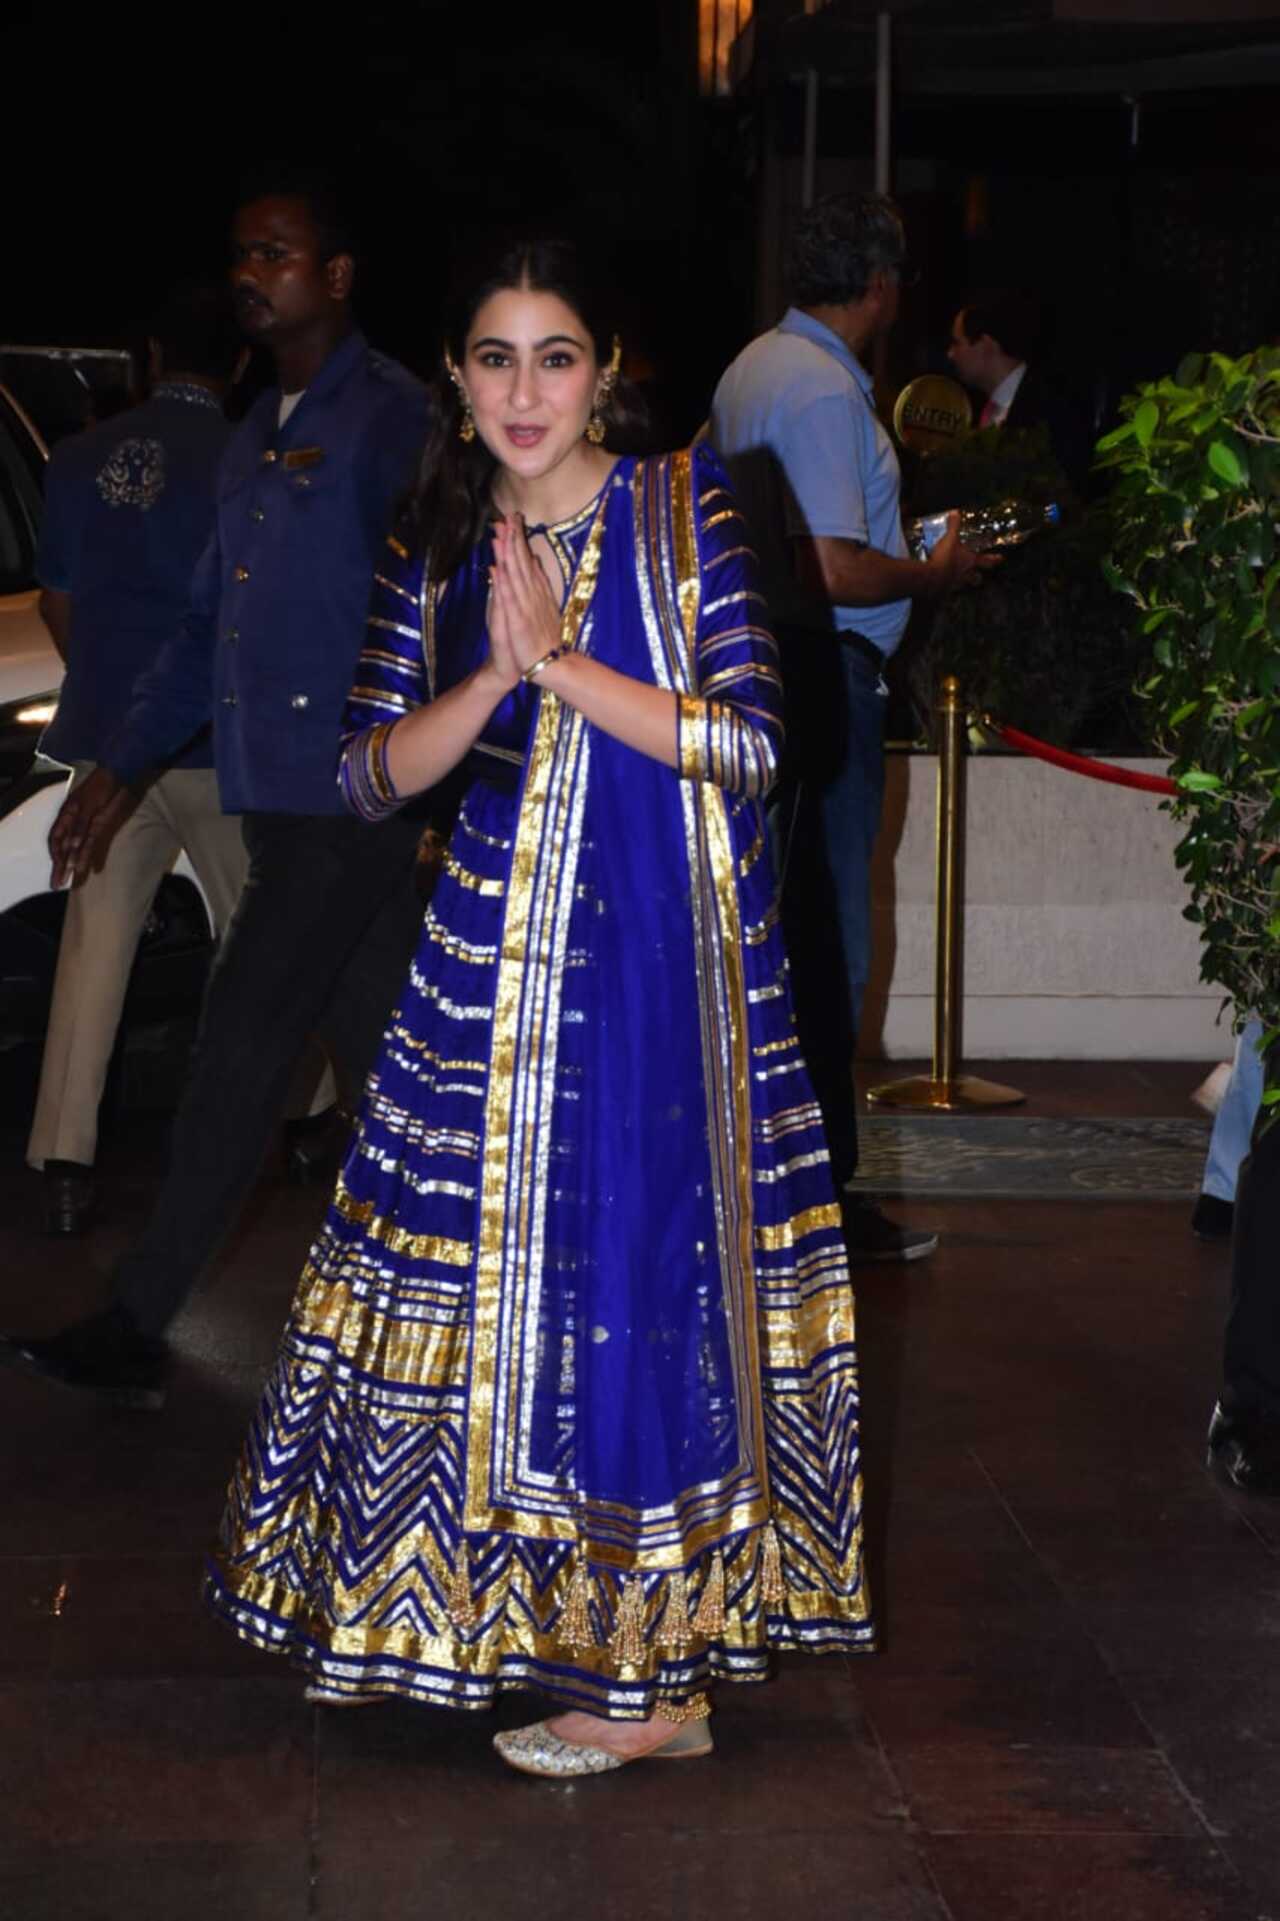 Sara Ali Khan did her trademark namaste to the paparazzi present outside the venue